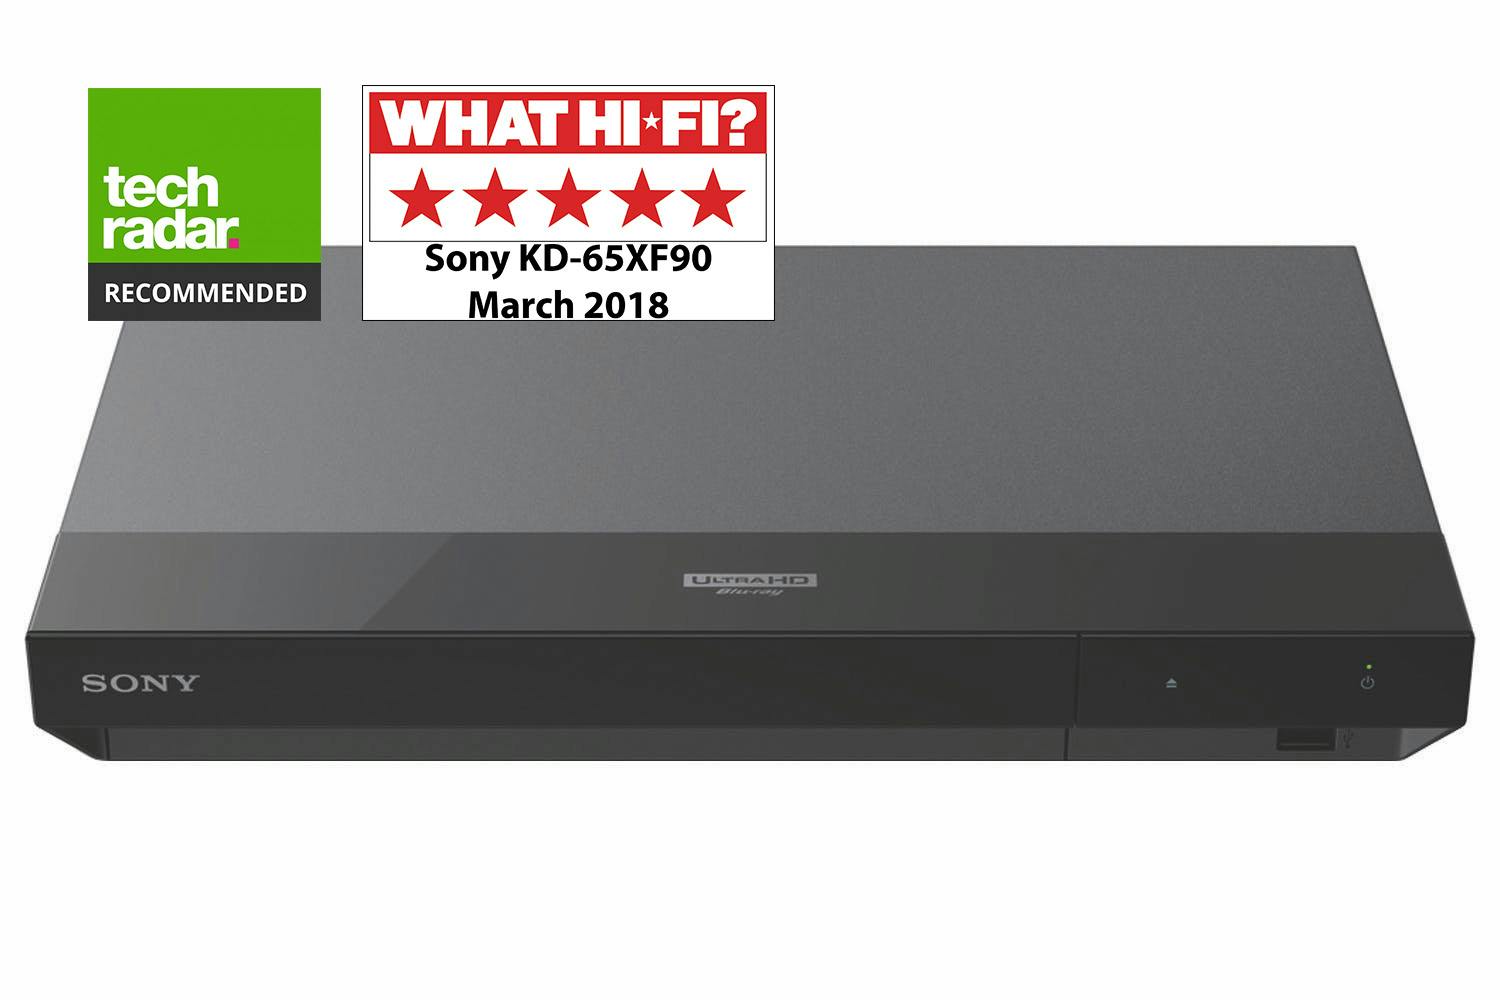 Reproductor de Blu-ray 4K Ultra HD con Dolby Vision, UBP-X700